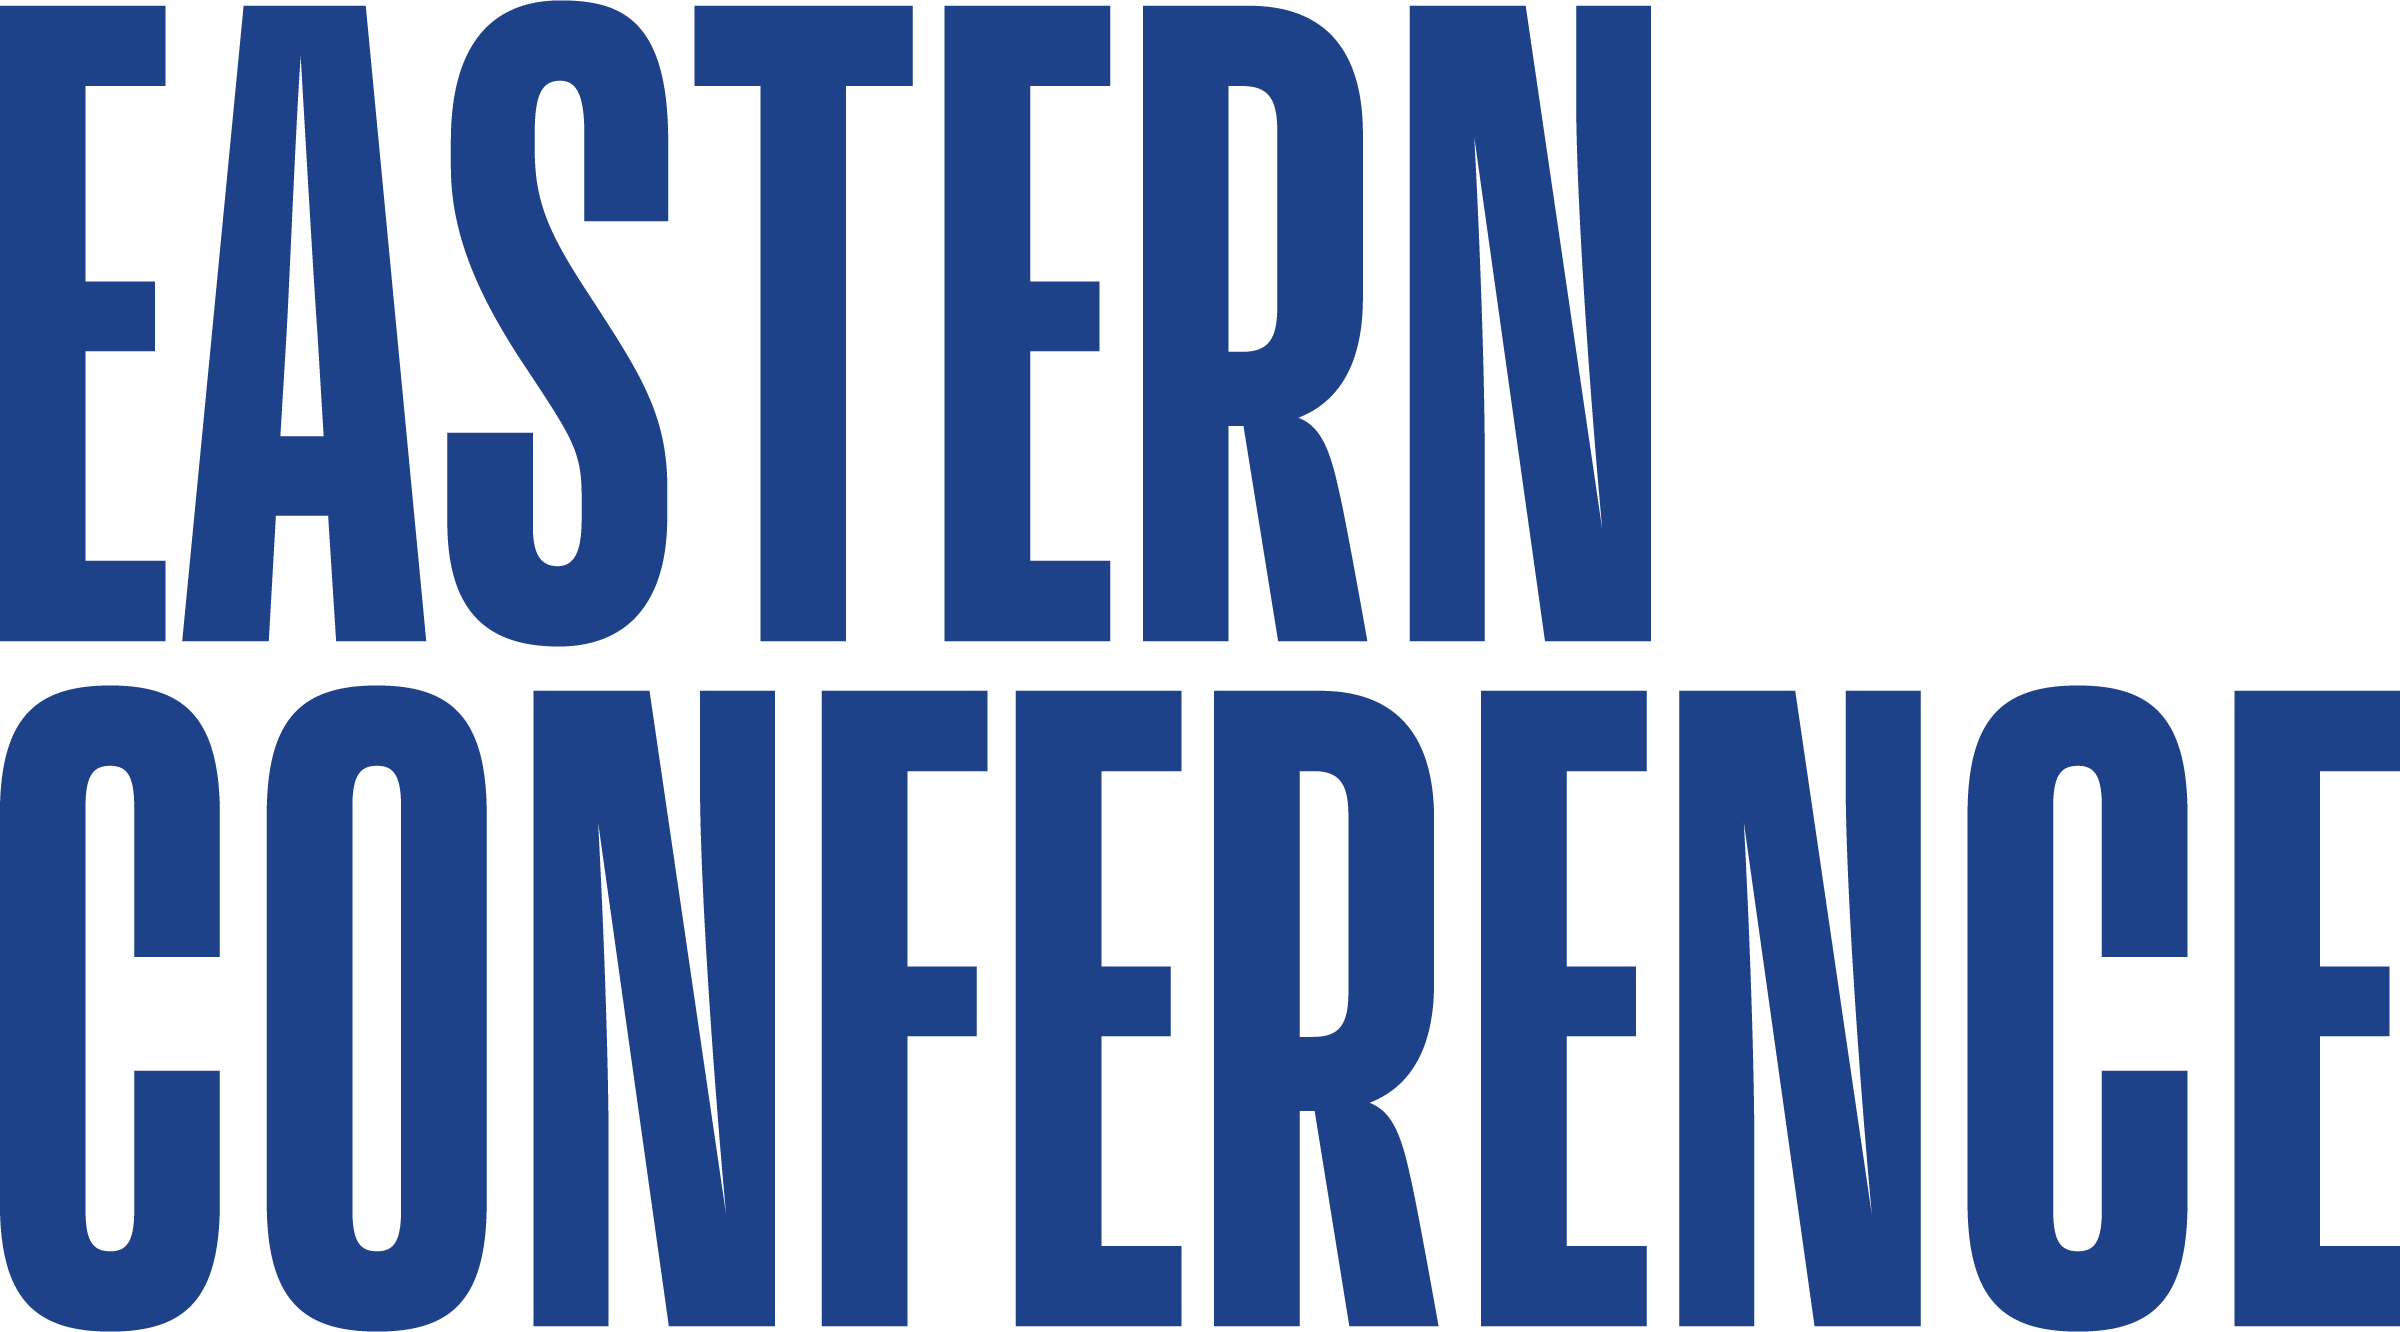 File:Eastern Conference (NBA) logo 2018.png.